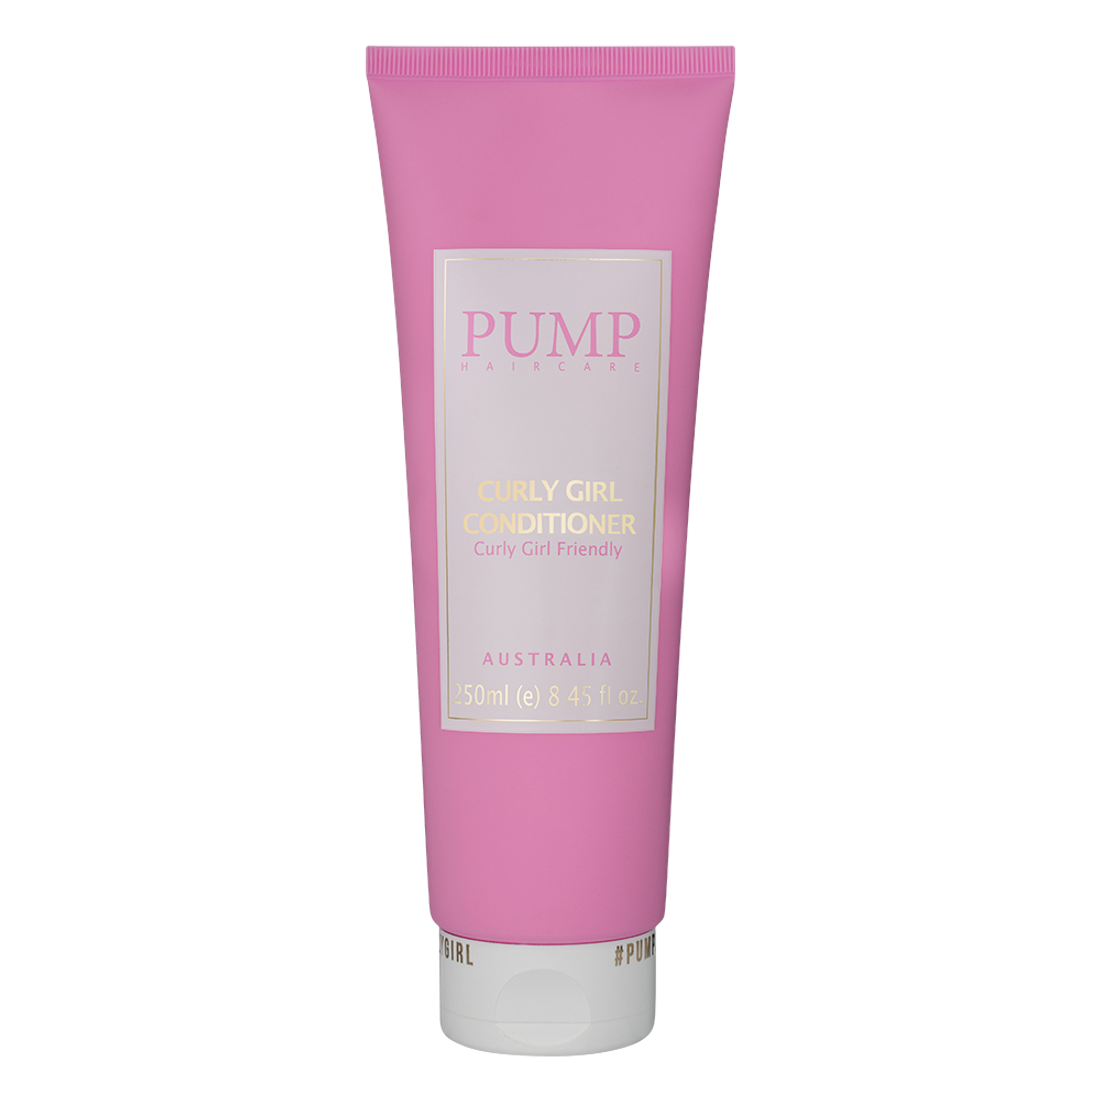 Pump Curly Girl Conditioner